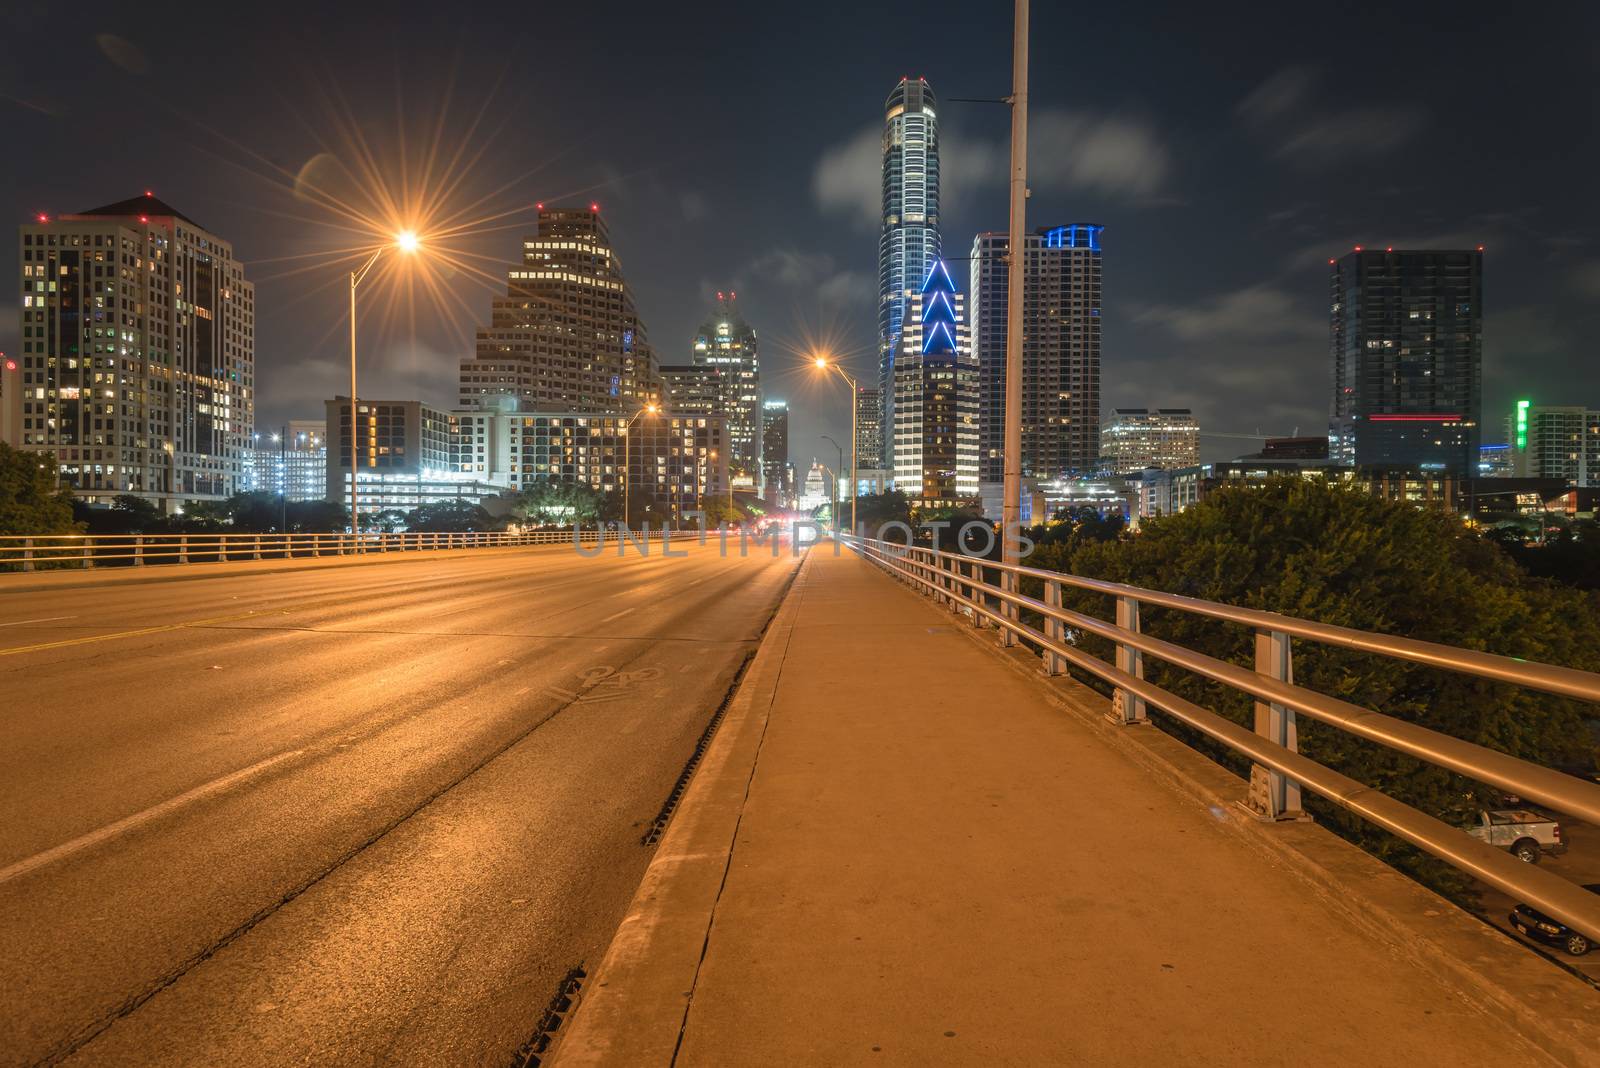 Austin modern skylines and state capitol building at night by trongnguyen